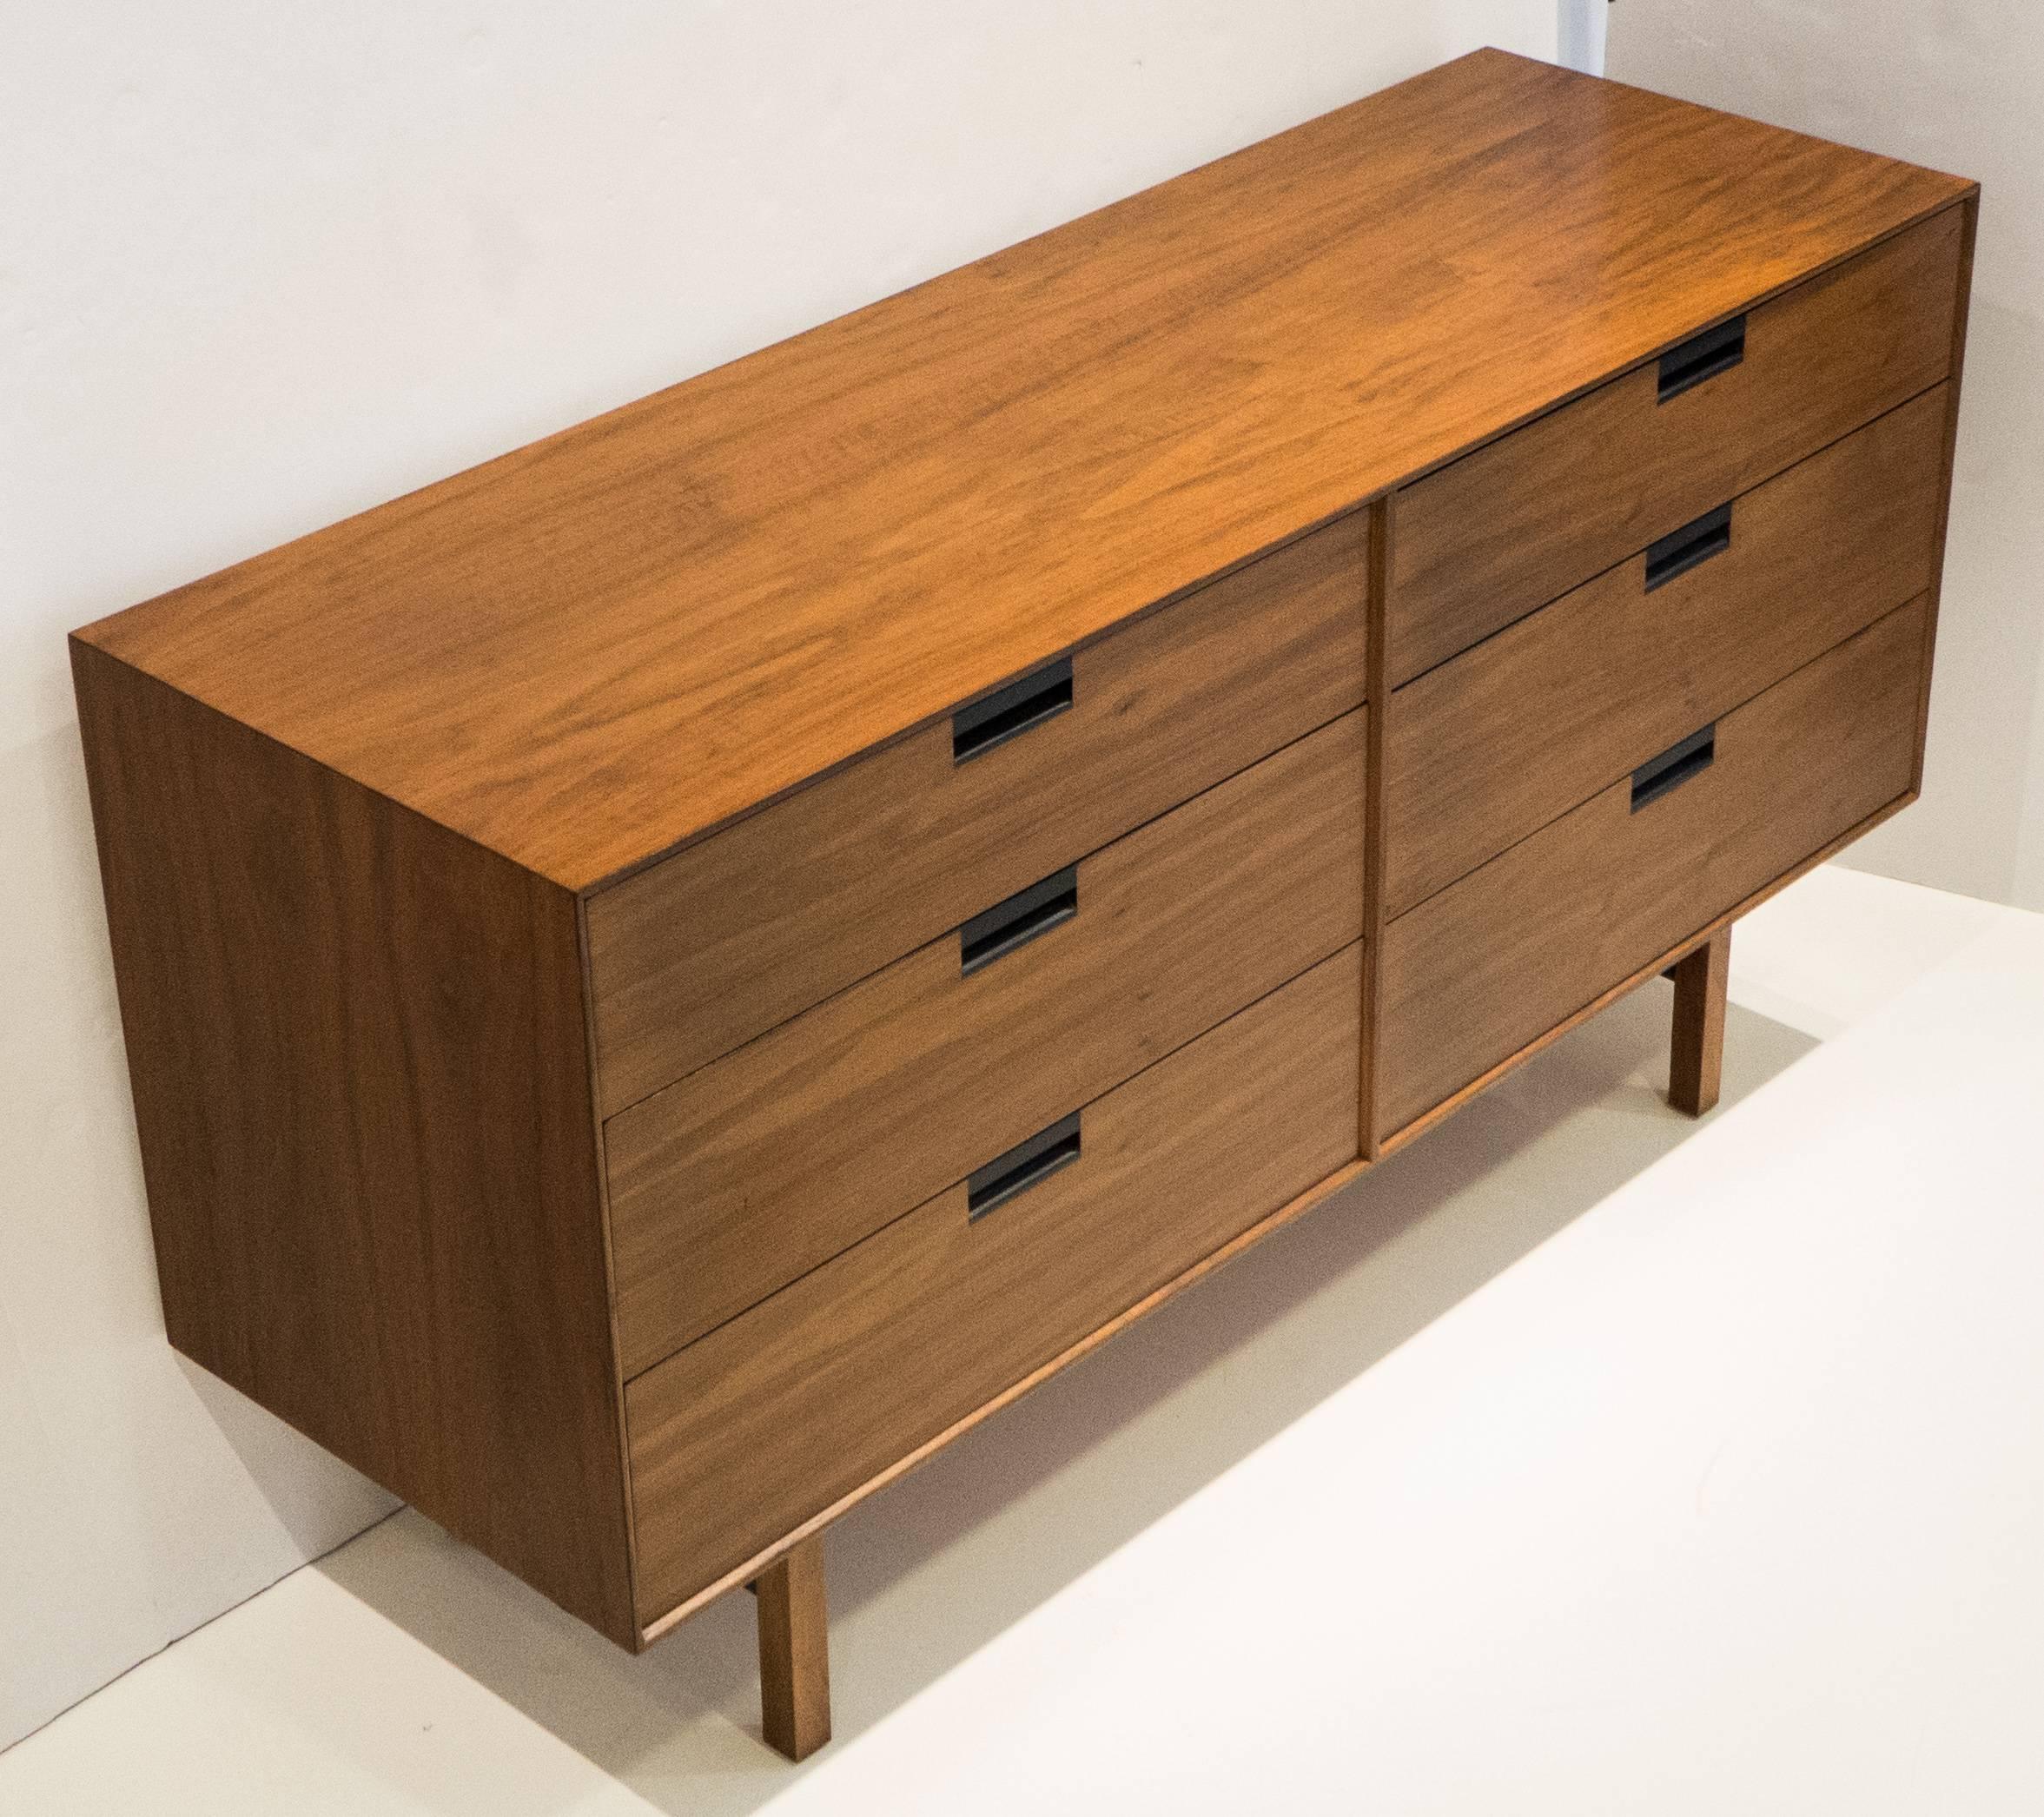 Double chest of drawers in walnut with carved ebonized pulls and ebonized stretchers. A handsome, well-made, and relatively scarce piece with nice details designed by Milo Baughman and produced by Arch Gordon, circa 1959. Oak and mahogany secondary